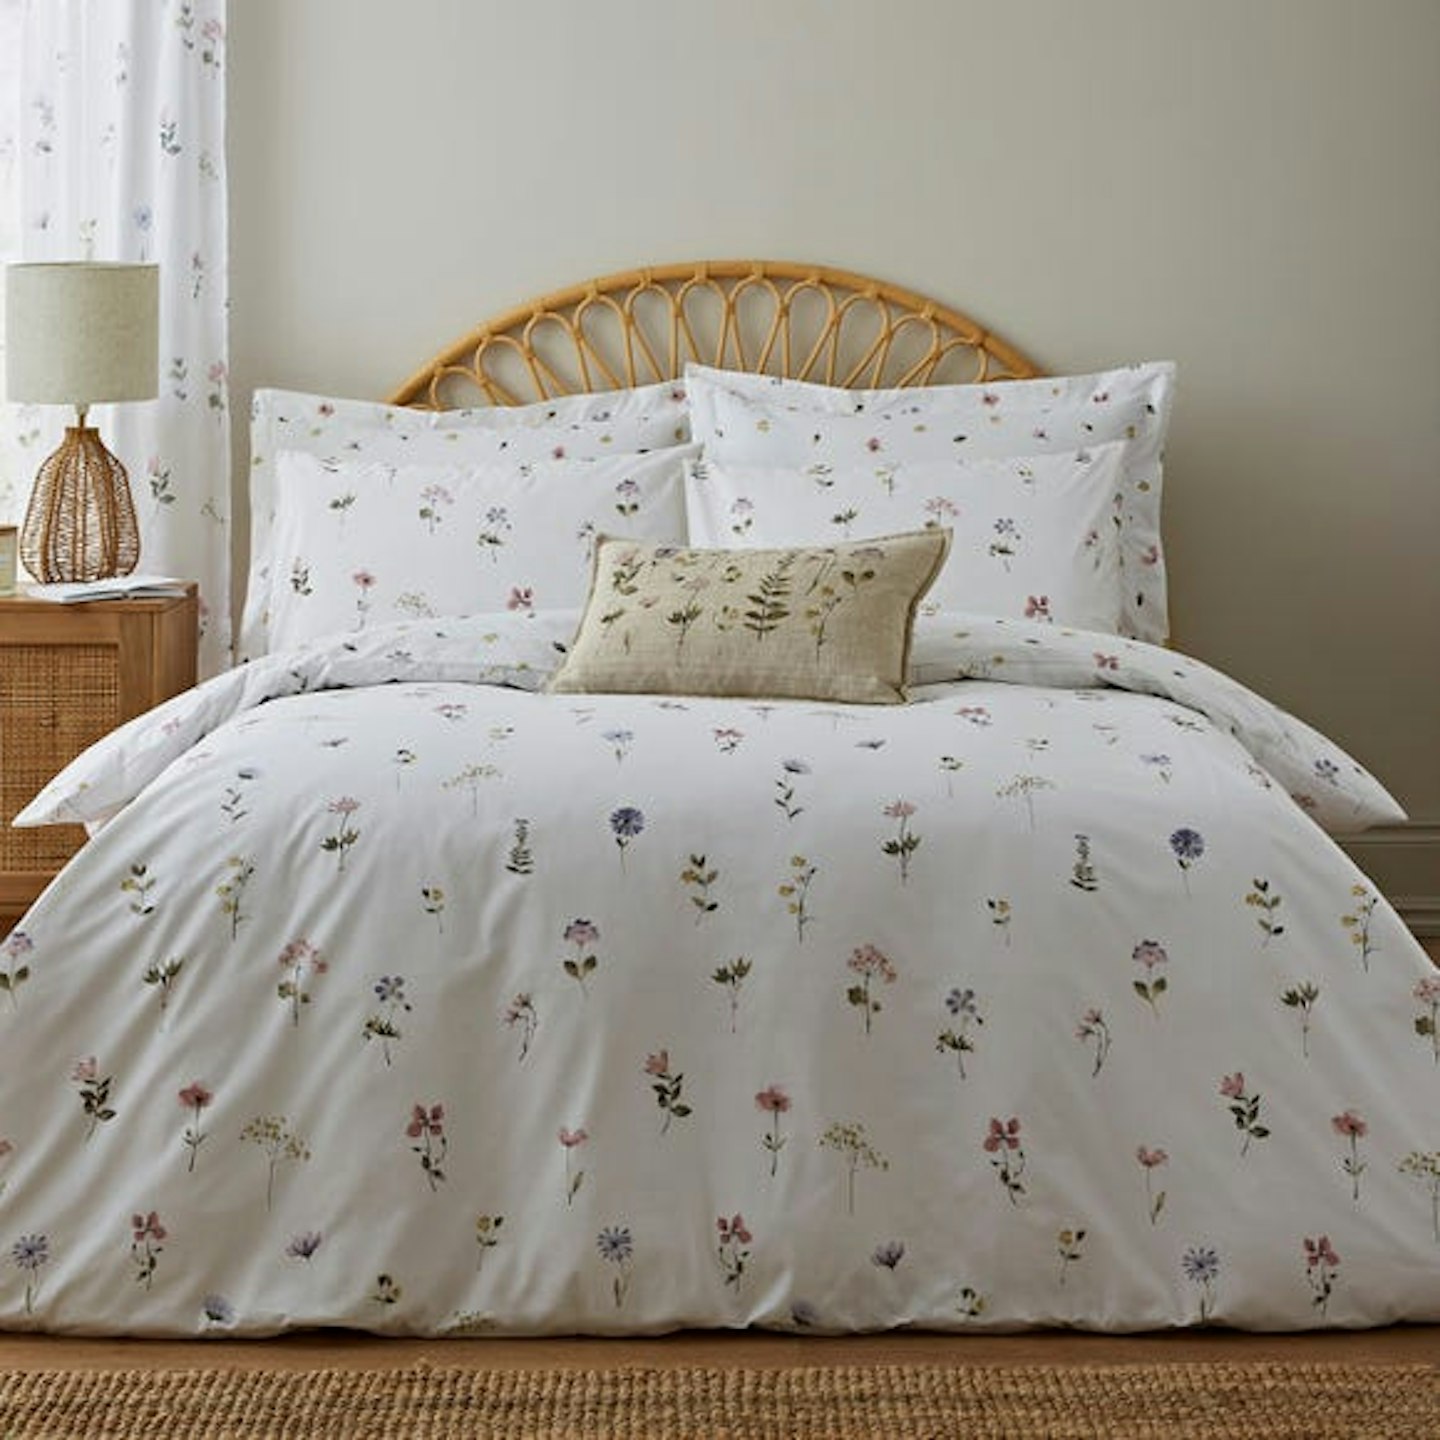 Dunelm, Pressed Floral White Duvet Cover and Pillowcase Set, £20